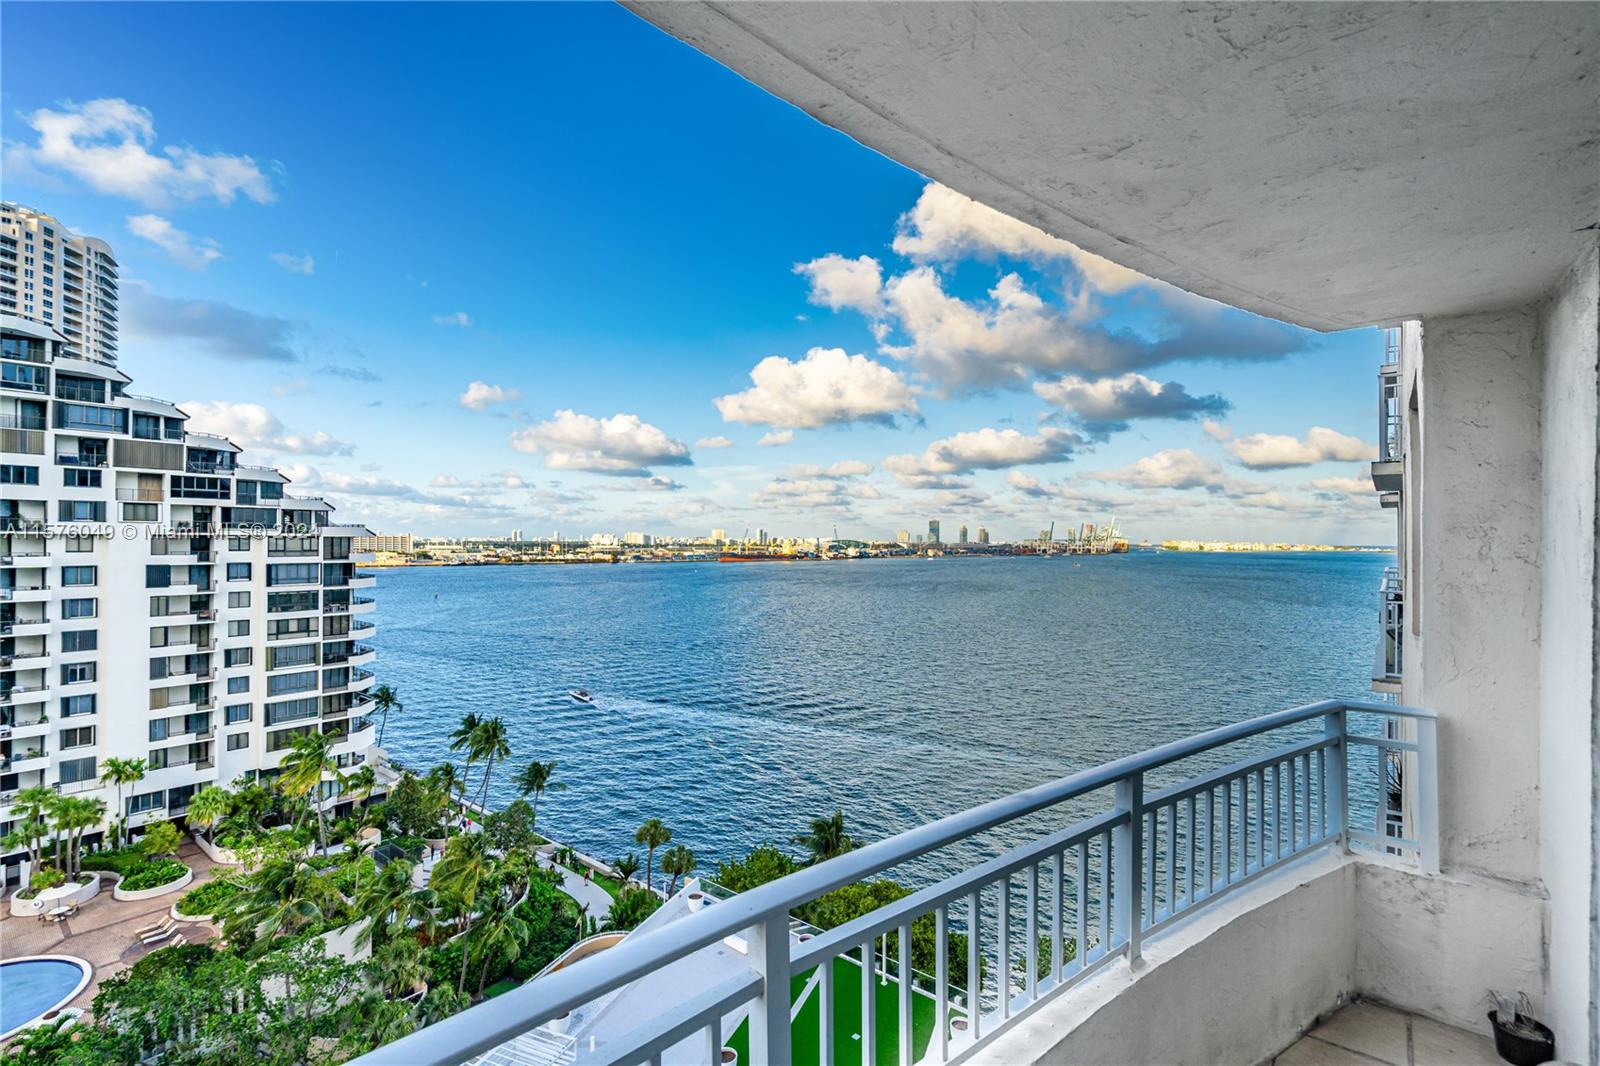 Nestled in the sought-after Brickell Key, this one-bedroom, one-bath condo is an oasis of tranquility amidst the bustling lifestyle of Brickell. This spacious and contemporary unit on the 14th floor offers top-of-the-line upgrades including granite countertops, wood cabinets, stainless steel appliances, and an in-unit washer/dryer, complemented by plenty of closets and beautiful bay views. With amenities such as 2 tennis courts, a pool, jacuzzi, health club, and clubroom, along with 24-hour front desk and security, this pet-friendly residence promises a luxurious living experience. Enjoy the natural light and breathtaking bay views while being conveniently close to restaurants, shops, and more. The recent restoration of the pool and deck adds to the appeal of this well-kept gem!